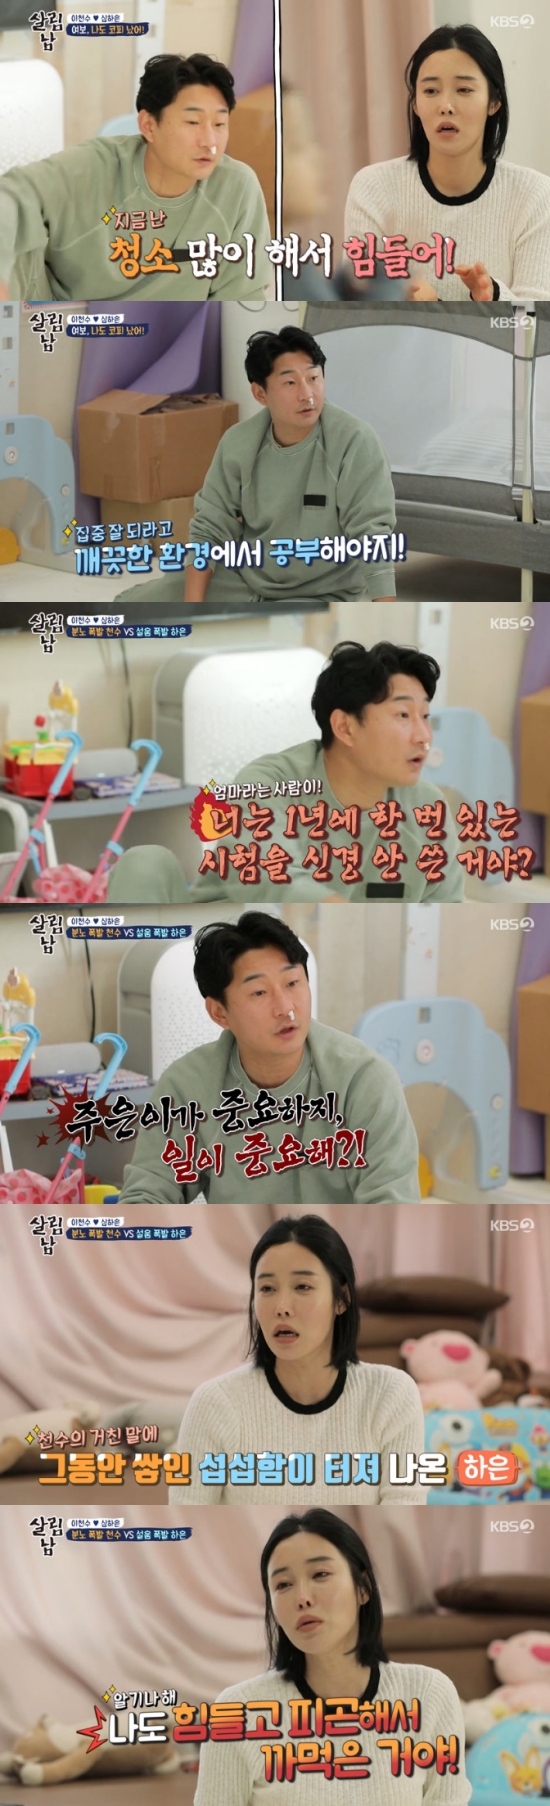 Model Shim Ha-eun has expressed his sadness at former footballer Lee Chun-soo.On the 23rd KBS 2TV Saving Men Season 2, Lee Chun-soo and Shim Ha-eun were in conflict with child care problems.Shim Ha-eun said, Im going to work later, so please look at Christina Aguileras. Lee Chun-soo said, What do you mean?Its Weekend, Shim Ha-eun said, expressing disapproval. Im working because Im Weekend.Christina Aguileras, I have nowhere to look at it, he asked.Shim Ha-eun then told the production team: There was a small company that was doing business before twins were born, a company that acts as an event for performance planning and exhibitions.I am happy to have a good opportunity to take care of the events that my family can enjoy together in the city where I live. Lee Chun-soo grumbled, saying, Can not you do it on weekdays? and Shim Ha-eun nailed it, saying, I could not do it because of Christina Aguileras on weekdays.Lee Chun-soo asked, Is not it a chat with my aunts in Weekend? Shim Ha-eun said, I closed the company for a long time and suddenly I work like this, but I do not want to die because I do not feel like it.Also, while Lee Chun-soo and Shim Ha-eun talked, twins Brother and Sister made Lee Ju-euns room a mess.Lee Chun-soo and Shim Ha-eun confirmed the Lee Ju-euns room later, and Lee Chun-soo said, My sister is important to study.I am very good at English, he said, blaming twins Brother and Sister.Shim Ha-eun has since gone out, and Lee Chun-soo has cleaned the sheeps room, which has moved children over stone.But twins Brother and Sister scribbled to the living room floor while Lee Chun-soo cleaned up, while Lee Chun-soo cleaned the living room again.In particular, Lee Chun-soo headed to the bathroom as a sudden nosebleed; twin Brother and Sister squeezed Lotion into her body, and applied it to the living room floor.At this time, Shim Ha-eun came home, and Shim Ha-eun was surprised to see twin Brother and Sister covered in Lotion.Lee Chun-soo also appeared with a tissue paper covering his nose, and Shim Ha-eun said, I can not see more when I say something to me.I do not clean it, I have to see the children. Lee Chun-soo said, I have an important test, but I have to do it in a clean place. Shim Ha-eun said, What do you do? I did not accept it.Once a year, he realized.Lee Chun-soo said, You did not care so much about the test once a year.You should not do that, and Shim Ha-eun said, Ju-eun does not have a proof photo. Lee Chun-soo said, I am so distracted that I work that I meet people and I am important.What do you do because you can not do it? Shim Ha-eun said, I make mistakes all the time. To be honest, I have children to go to the House alone.I have to sleep with my brother for three days a week and seven days. Why do I sleep with all the children all seven days? After all, Shim Ha-eun said, My brother is wrong. If it does not work out, it is wrong because of you.That night Lee Chun-soo saw Shim Ha-eun working alone and approached first and helped him.Lee Chun-soo said that if he had talked about the hard part in advance, he would have helped him, and emphasized that misunderstandings occur because he does not even ask for help.Shim Ha-eun said he would talk forward, and the two men resolved and reconciled the conflict.Photo = KBS Broadcasting Screen